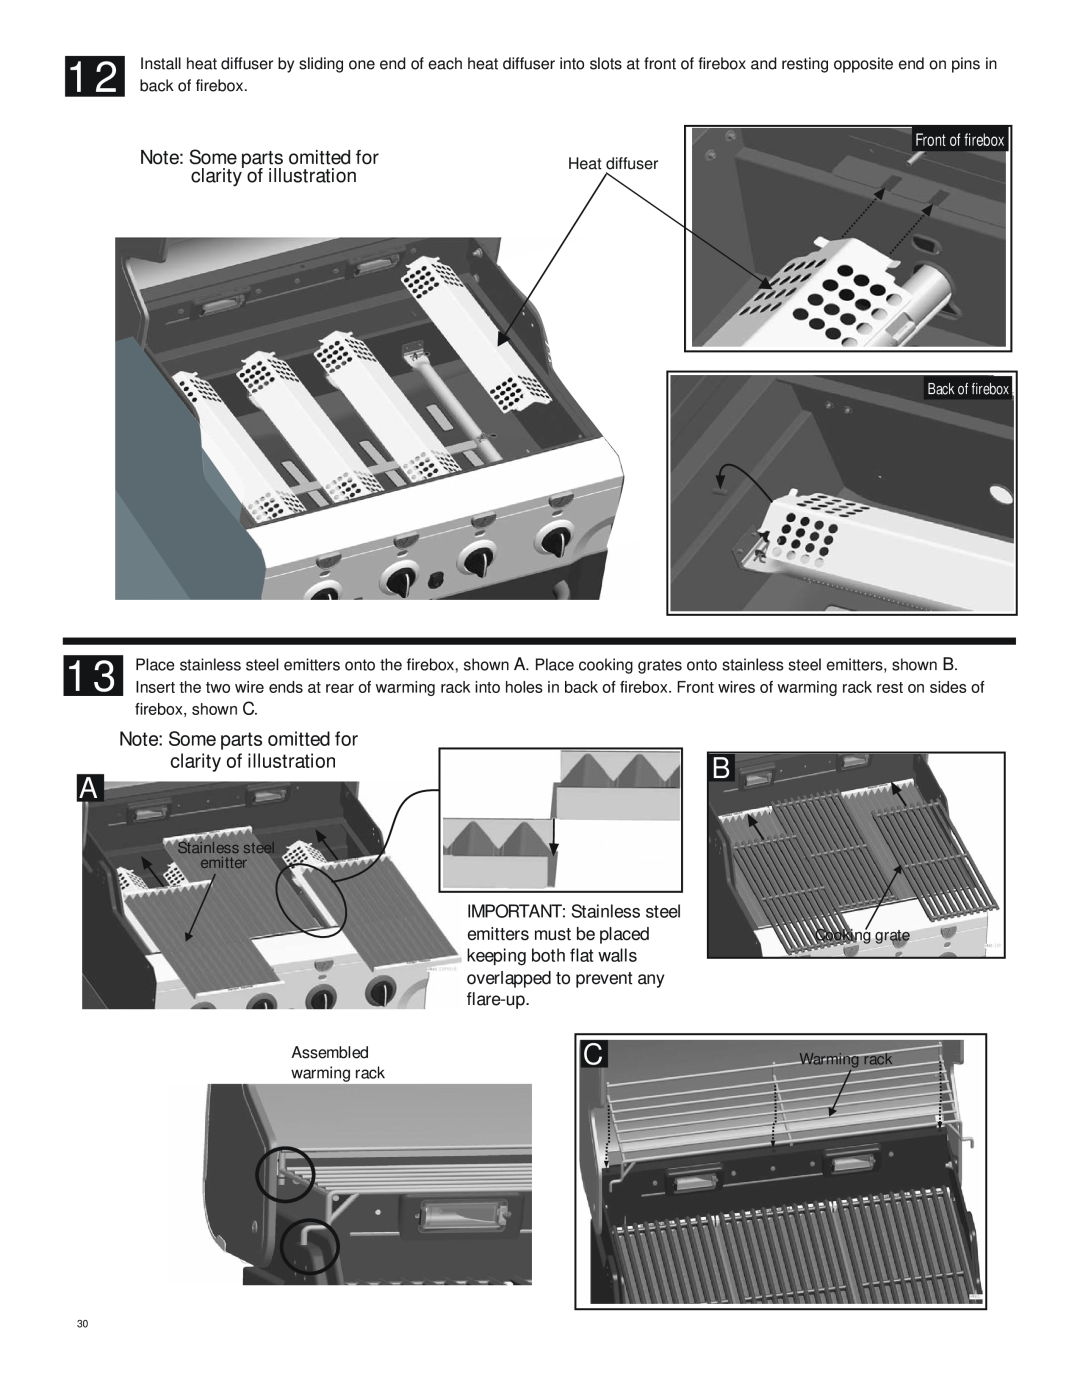 Char-Broil 463269411 manual emitters must be placed, keeping both flat walls, flare-up 